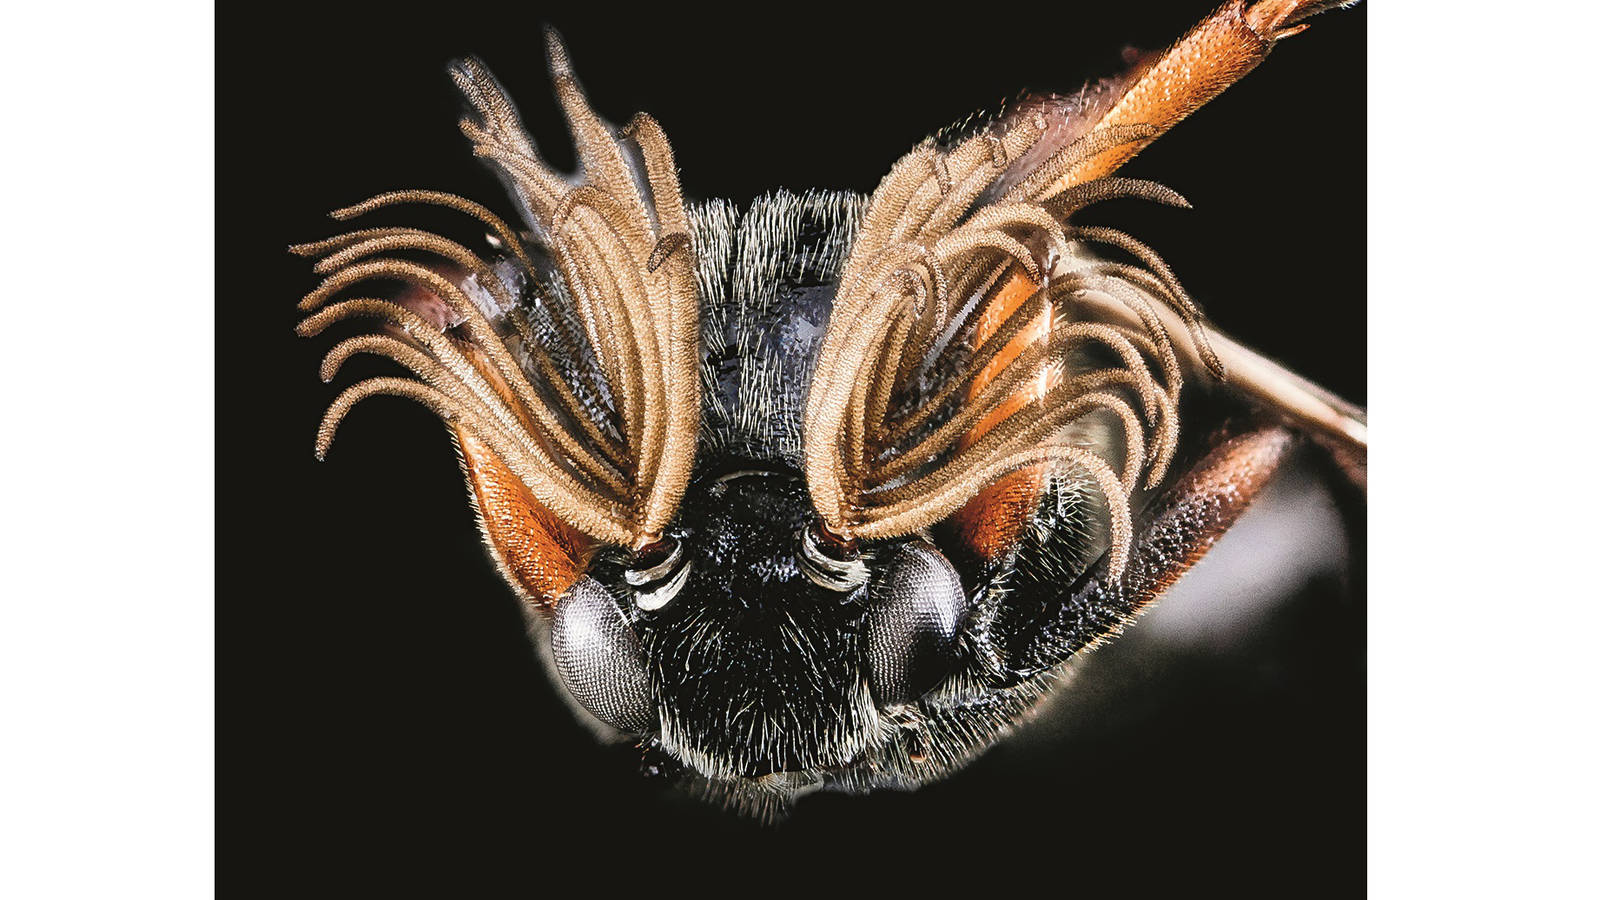 <h3 style="text-align: center; padding: 50px;"><span class="text-Intro-style">Ripiphorus beetle (species unknown), Great Smoky Mountains National Park, Tennessee. © SAM DROEGE/USGS BEE INVENTORY AND MONITORING LAB</span></h3>